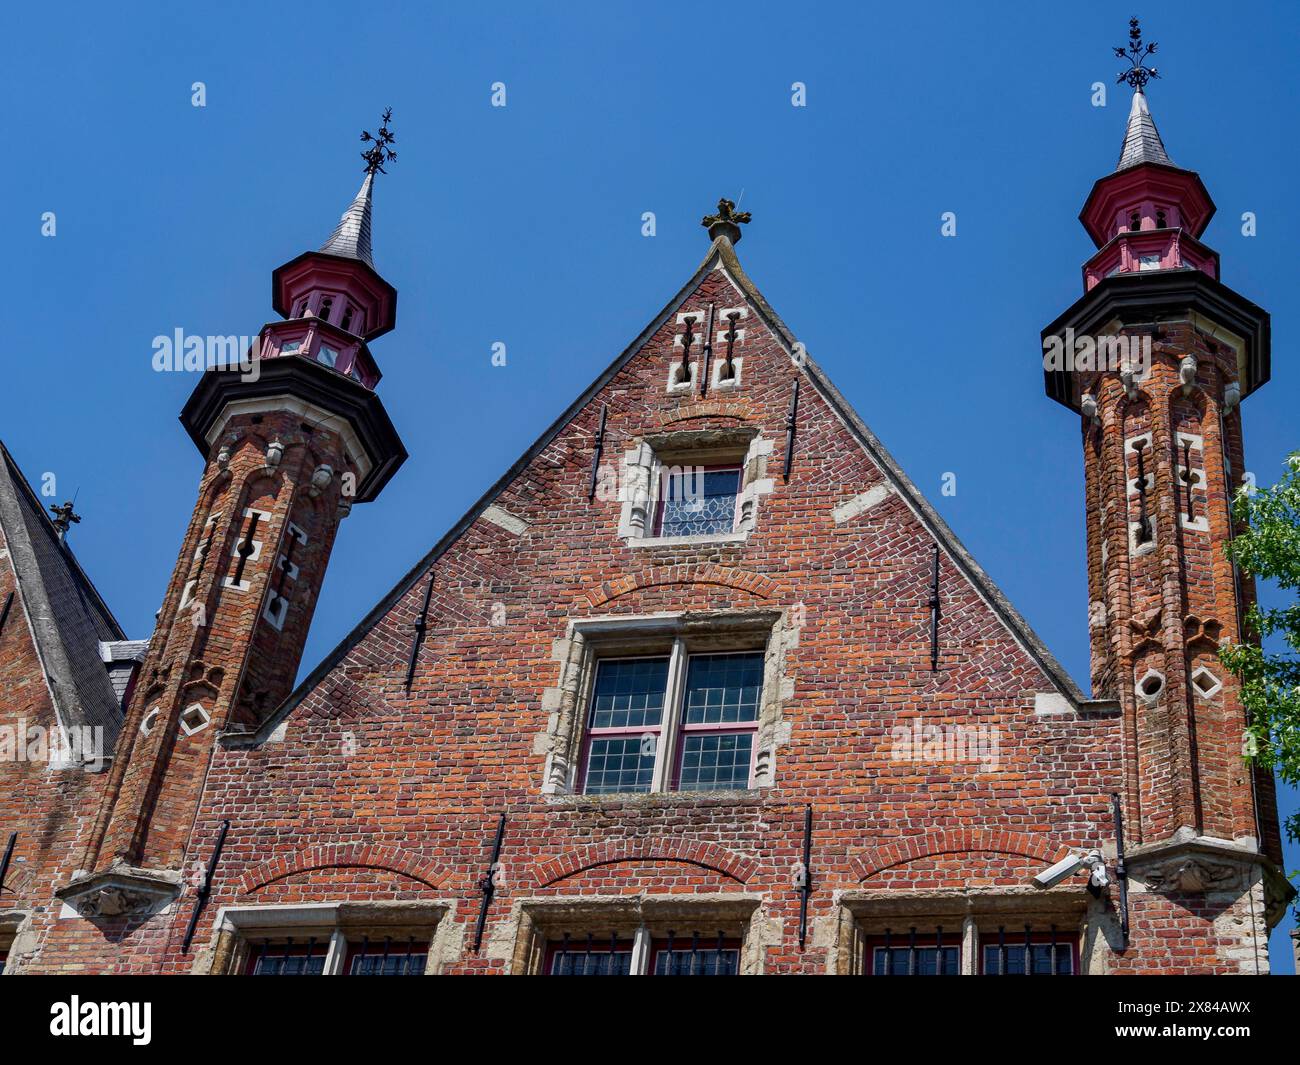 Facade of an old building with striking gothic towers and green shutters under a clear sky, old historic house facades with towers and bridges by a Stock Photo